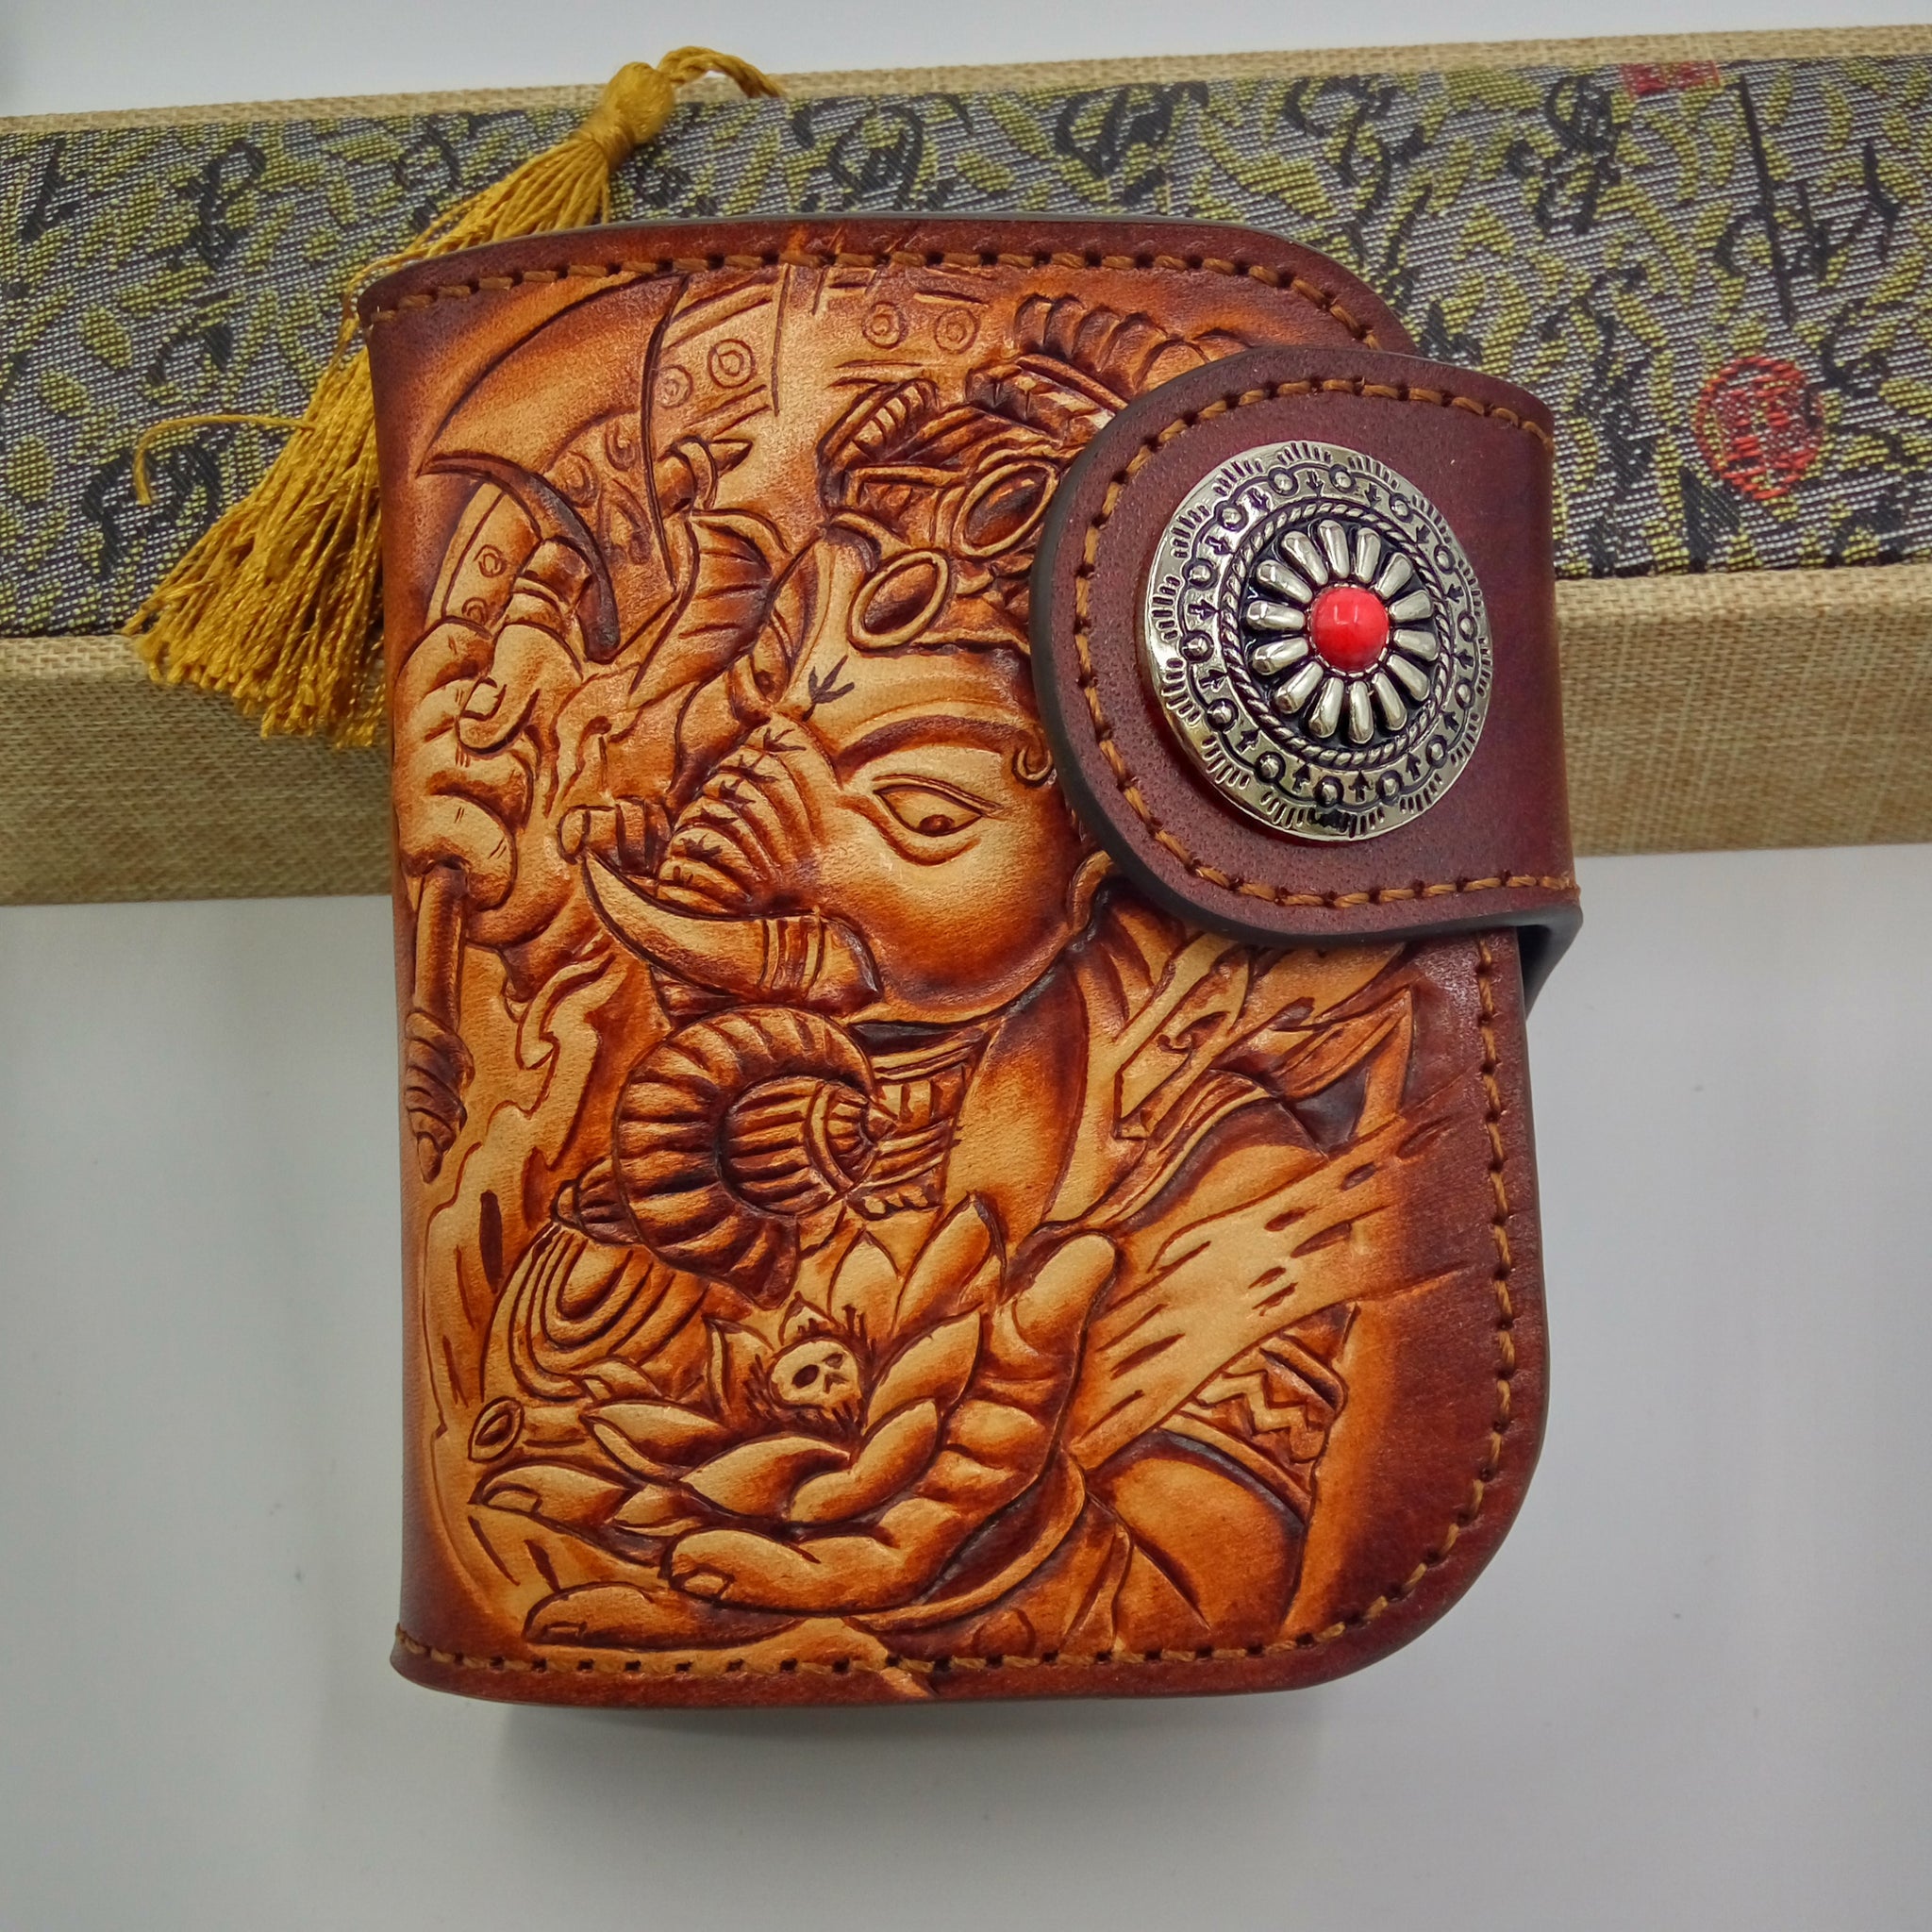 Handmade Leather Tooled Ganesha Mens Chain Biker Wallet Cool Leather Wallet Small Wallets for Men